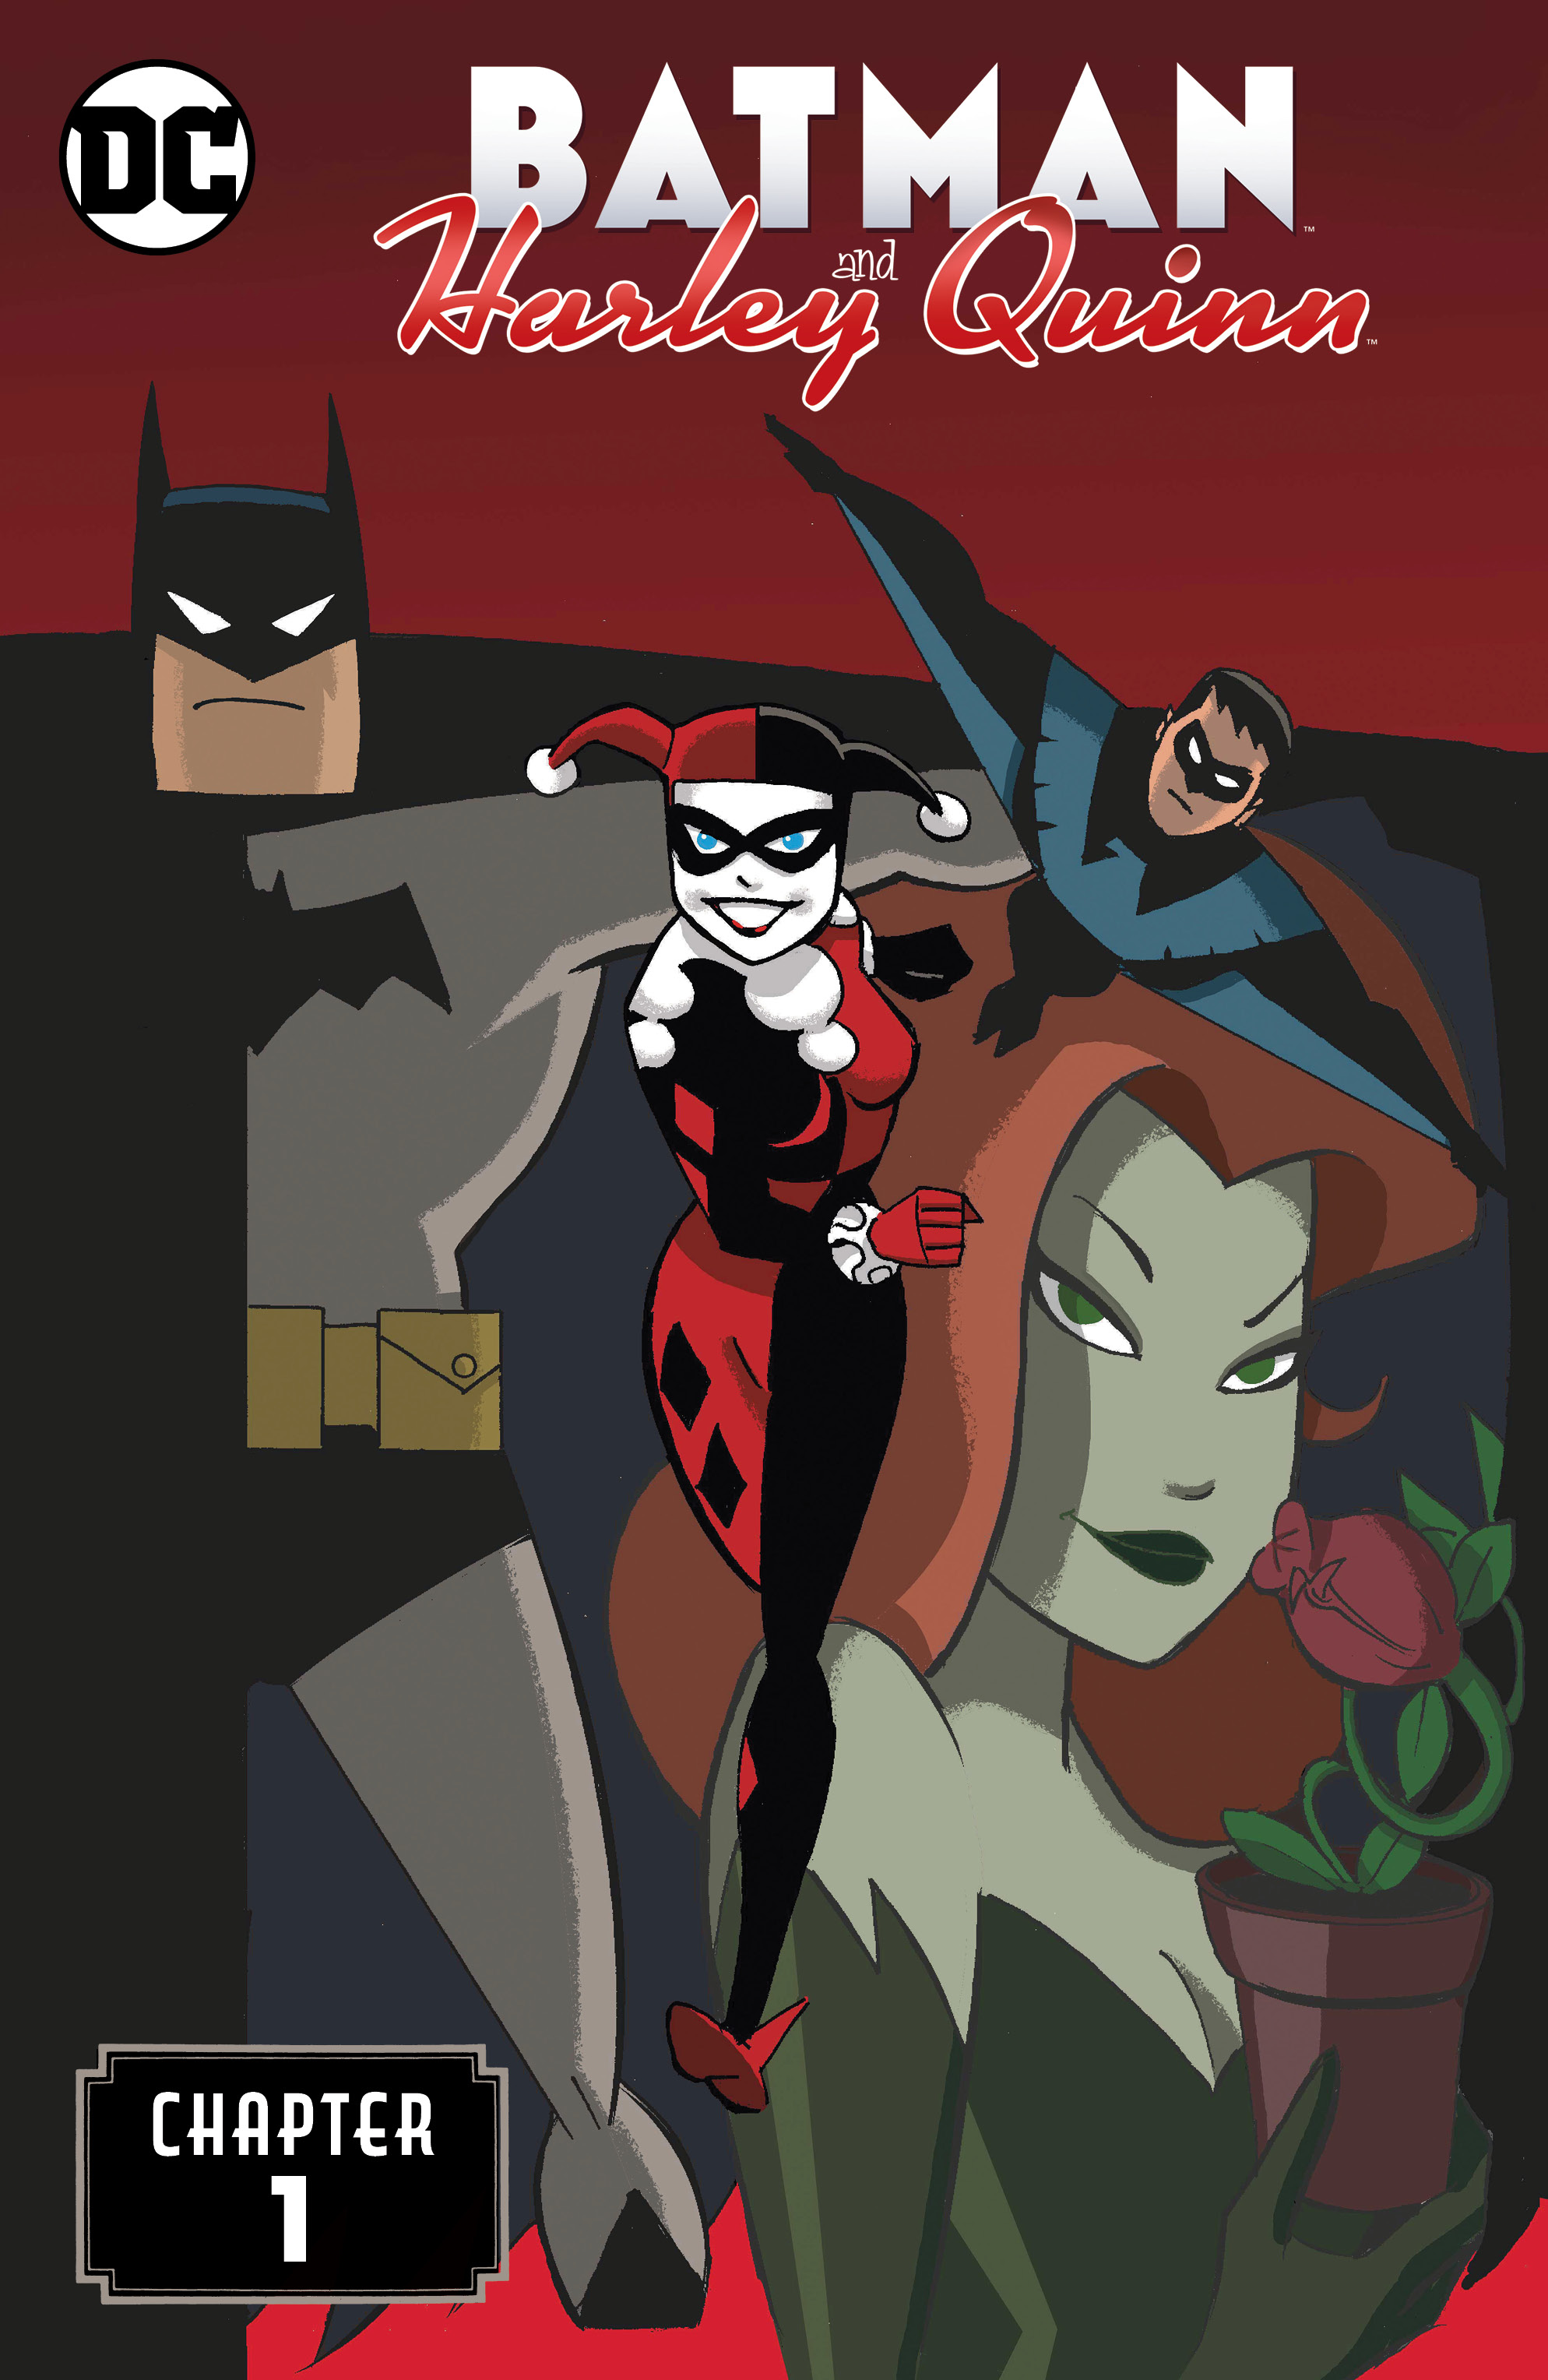 Batman and Harley Quinn #1 preview images